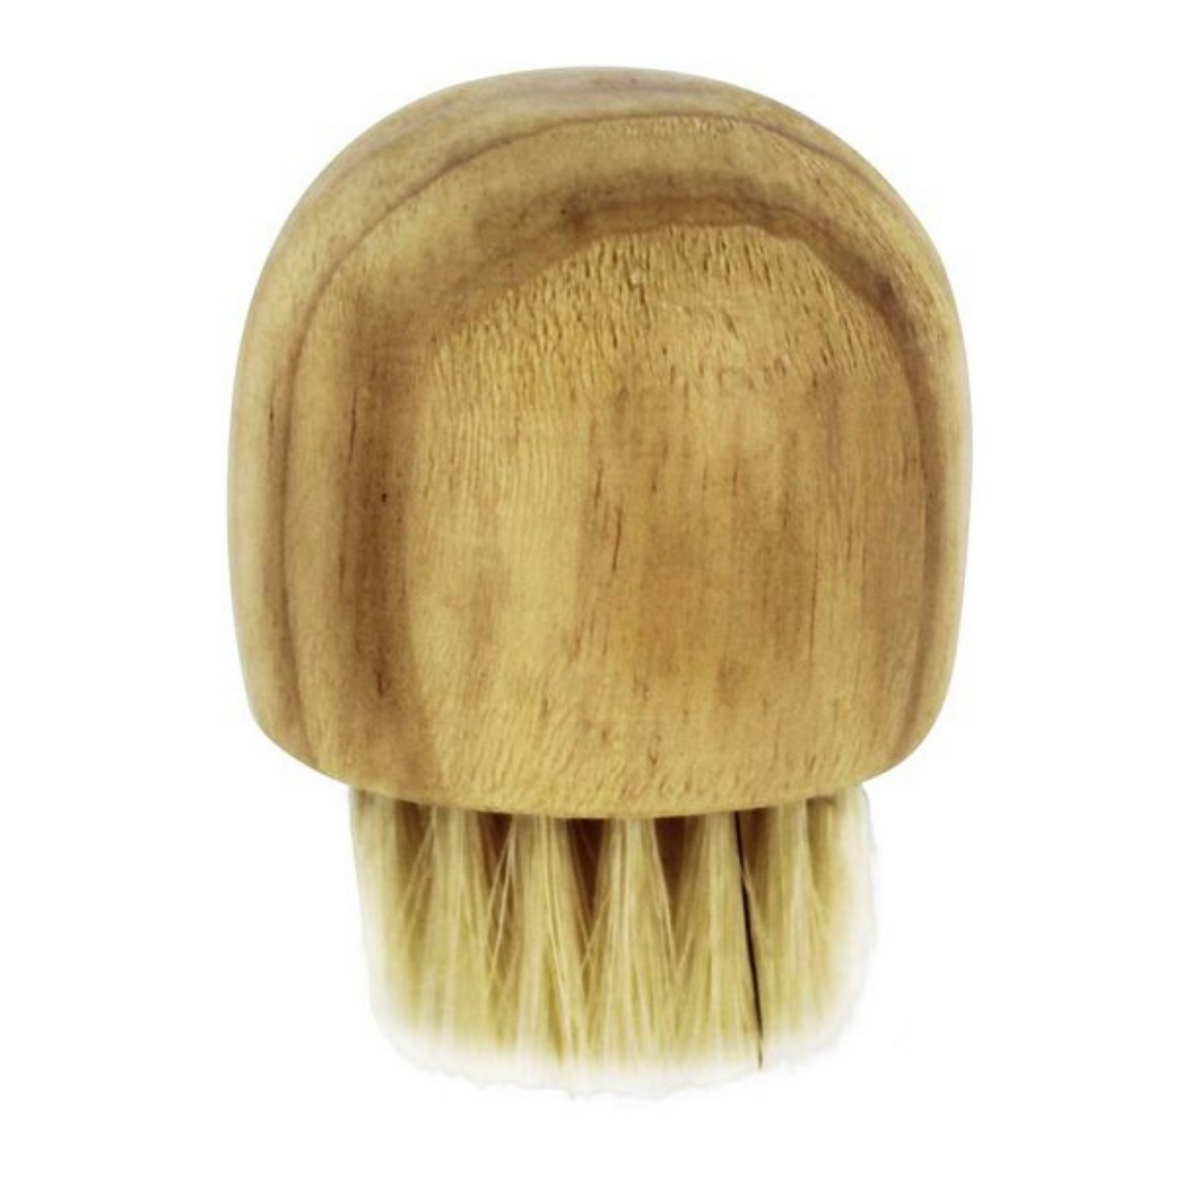 Primary Image of Handheld Complexion Brush